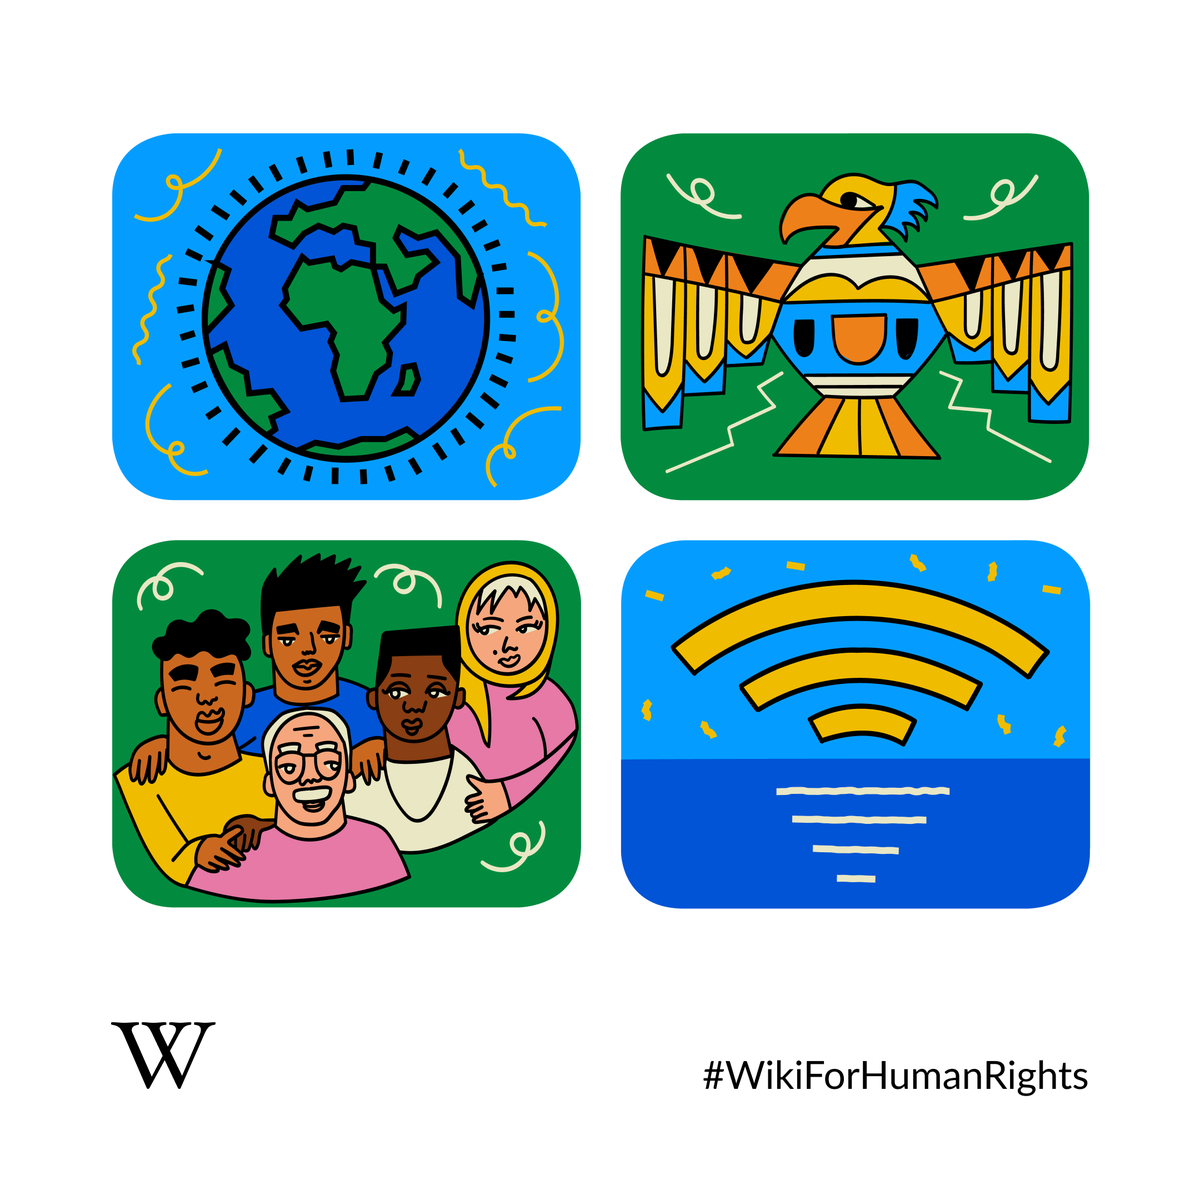 The air we breathe, the 💧we drink & the world in which we live can mean the difference between life & death

Now is the time to claim the human right to a safe, clean, healthy & sustainable environment.

Join the #WikiForHumanRights launch to learn more
bit.ly/3e0h8lk